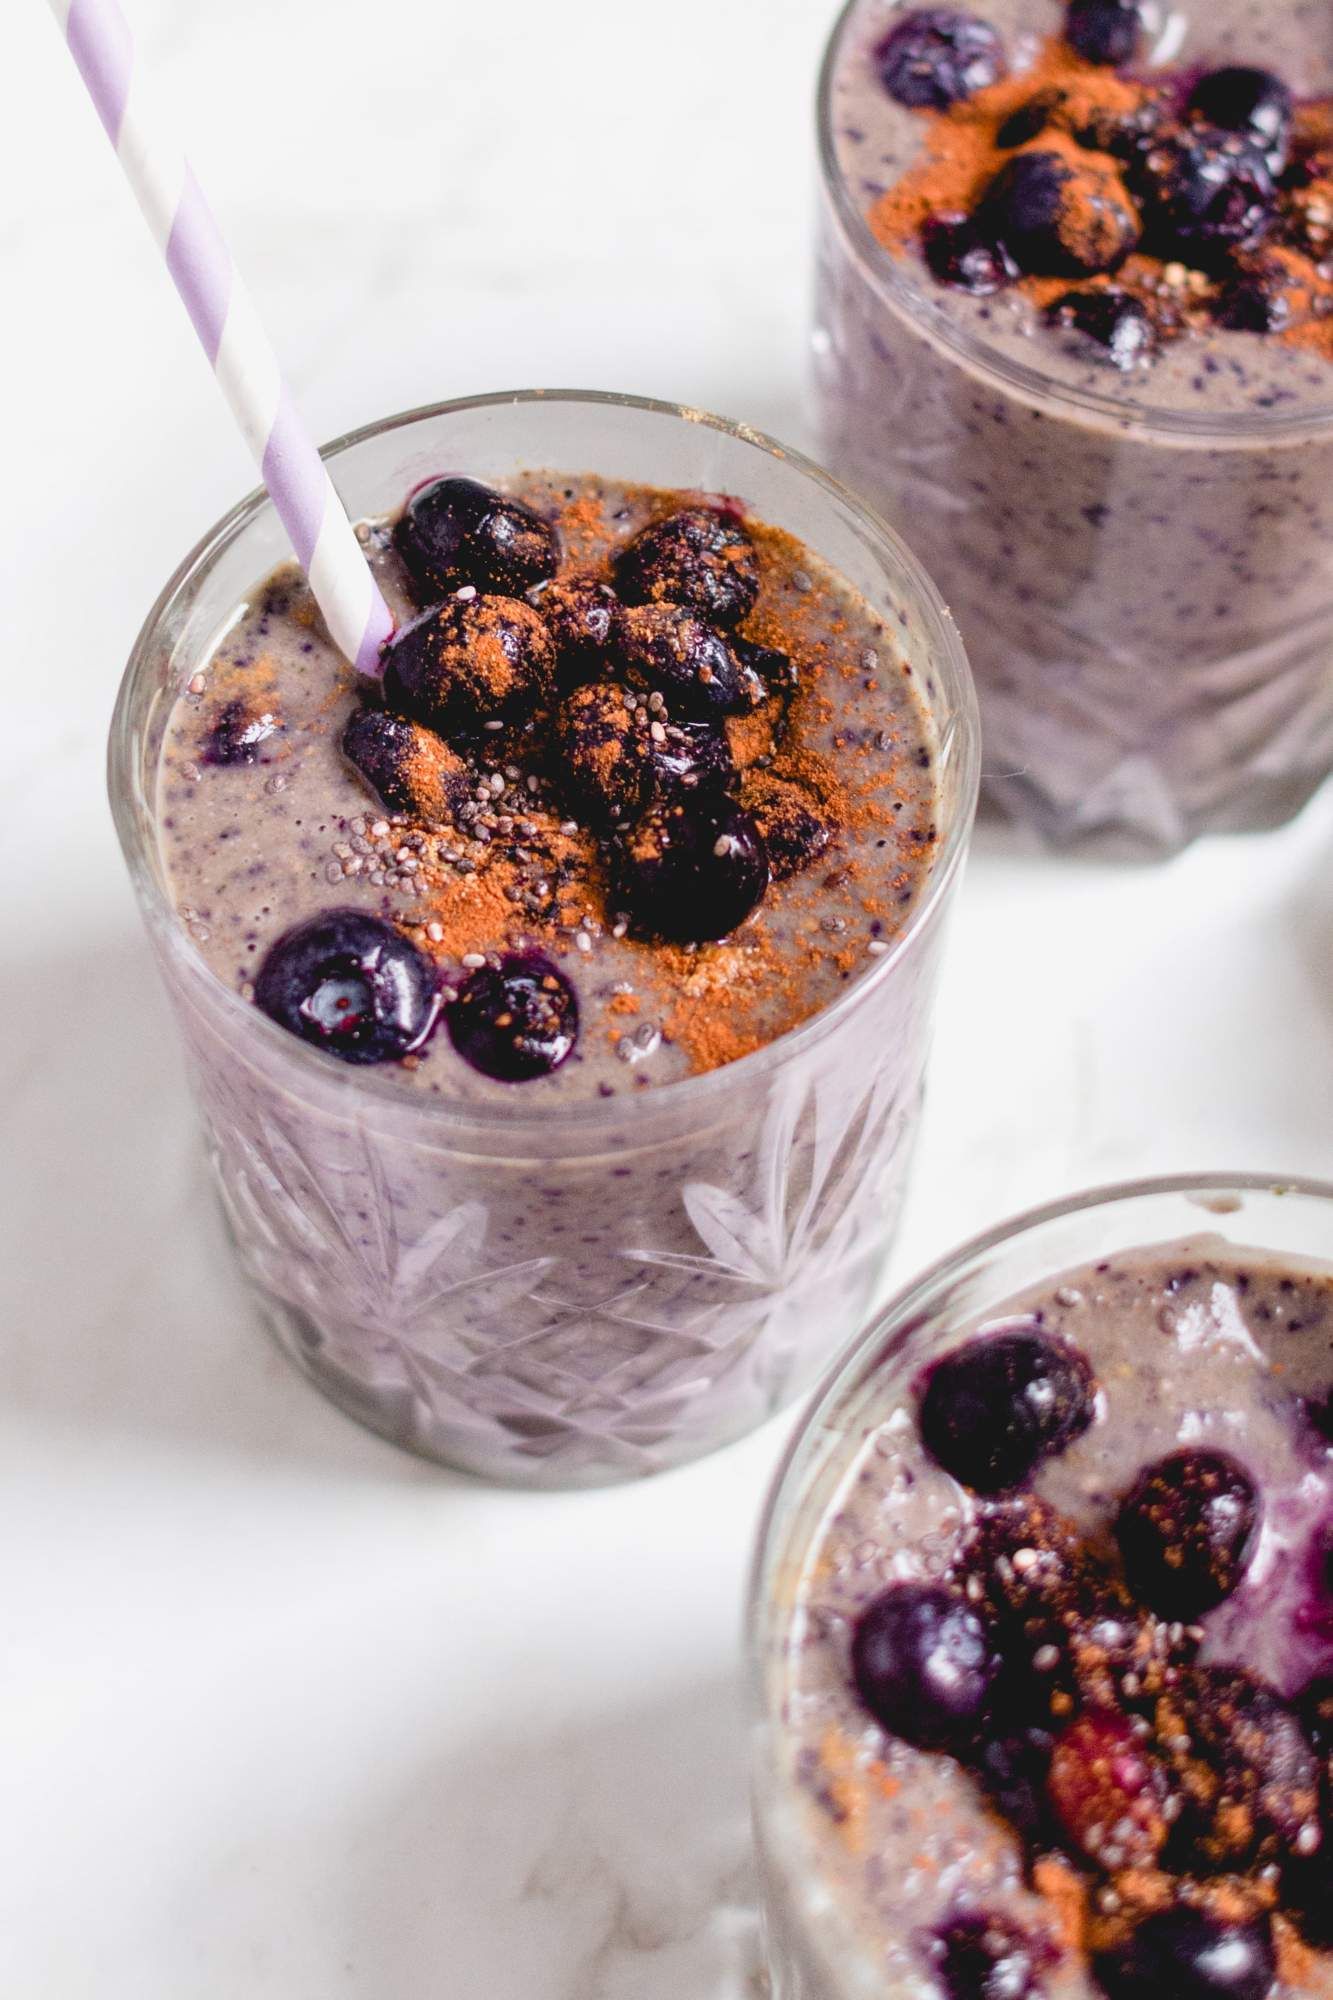 Banana and blueberry smoothies in a glass with frozen blueberries and cinnamon on top with a striped straw.